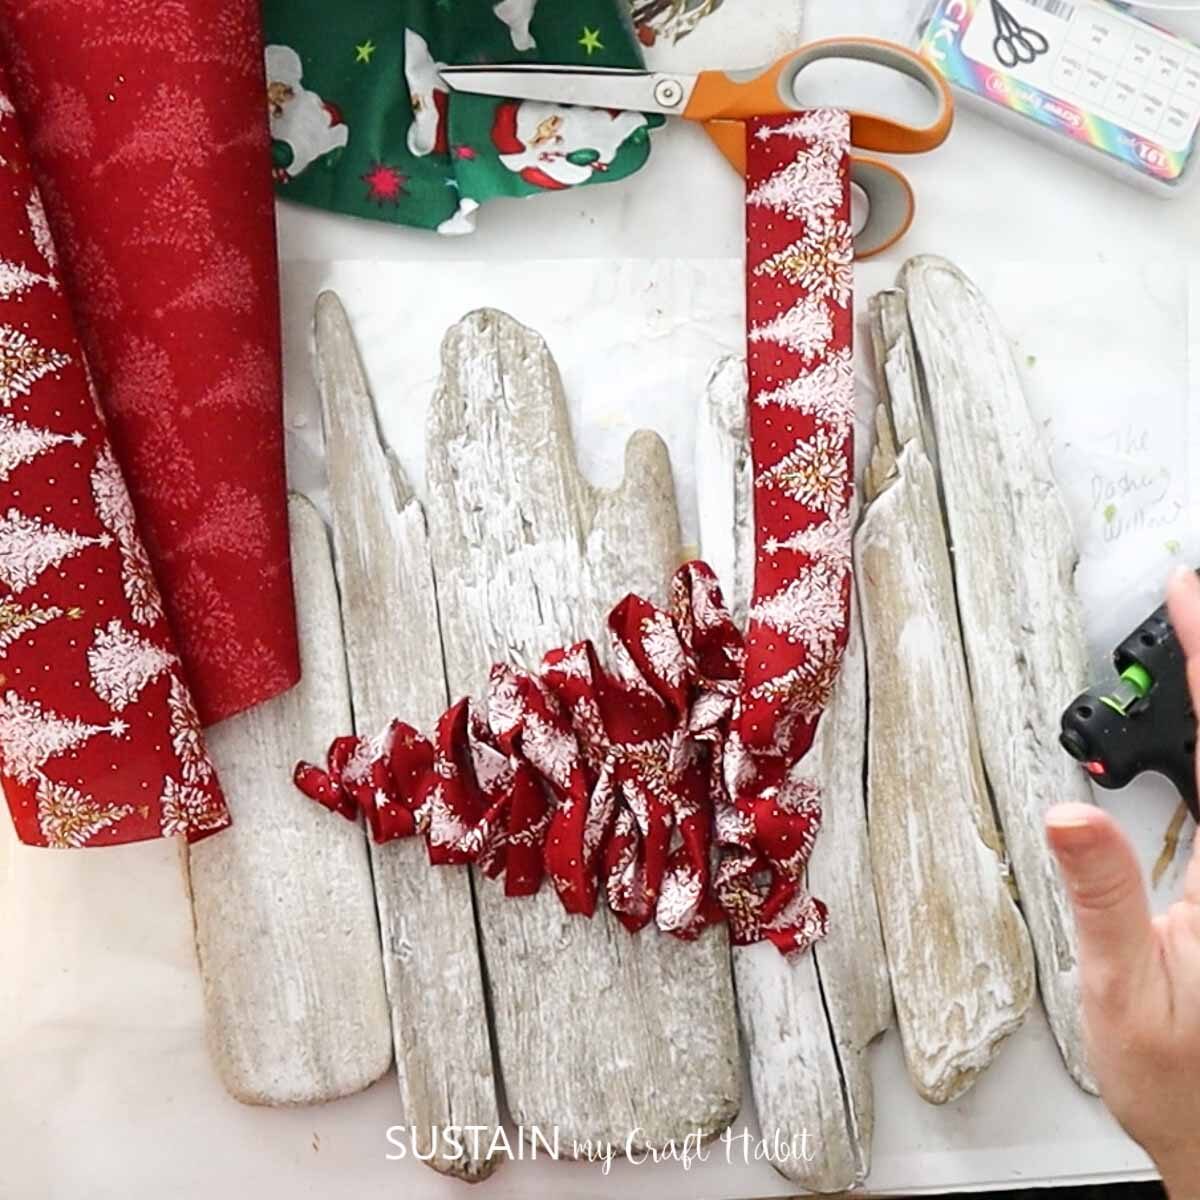 Hot gluing strips of ribbon to form a Christmas tree.